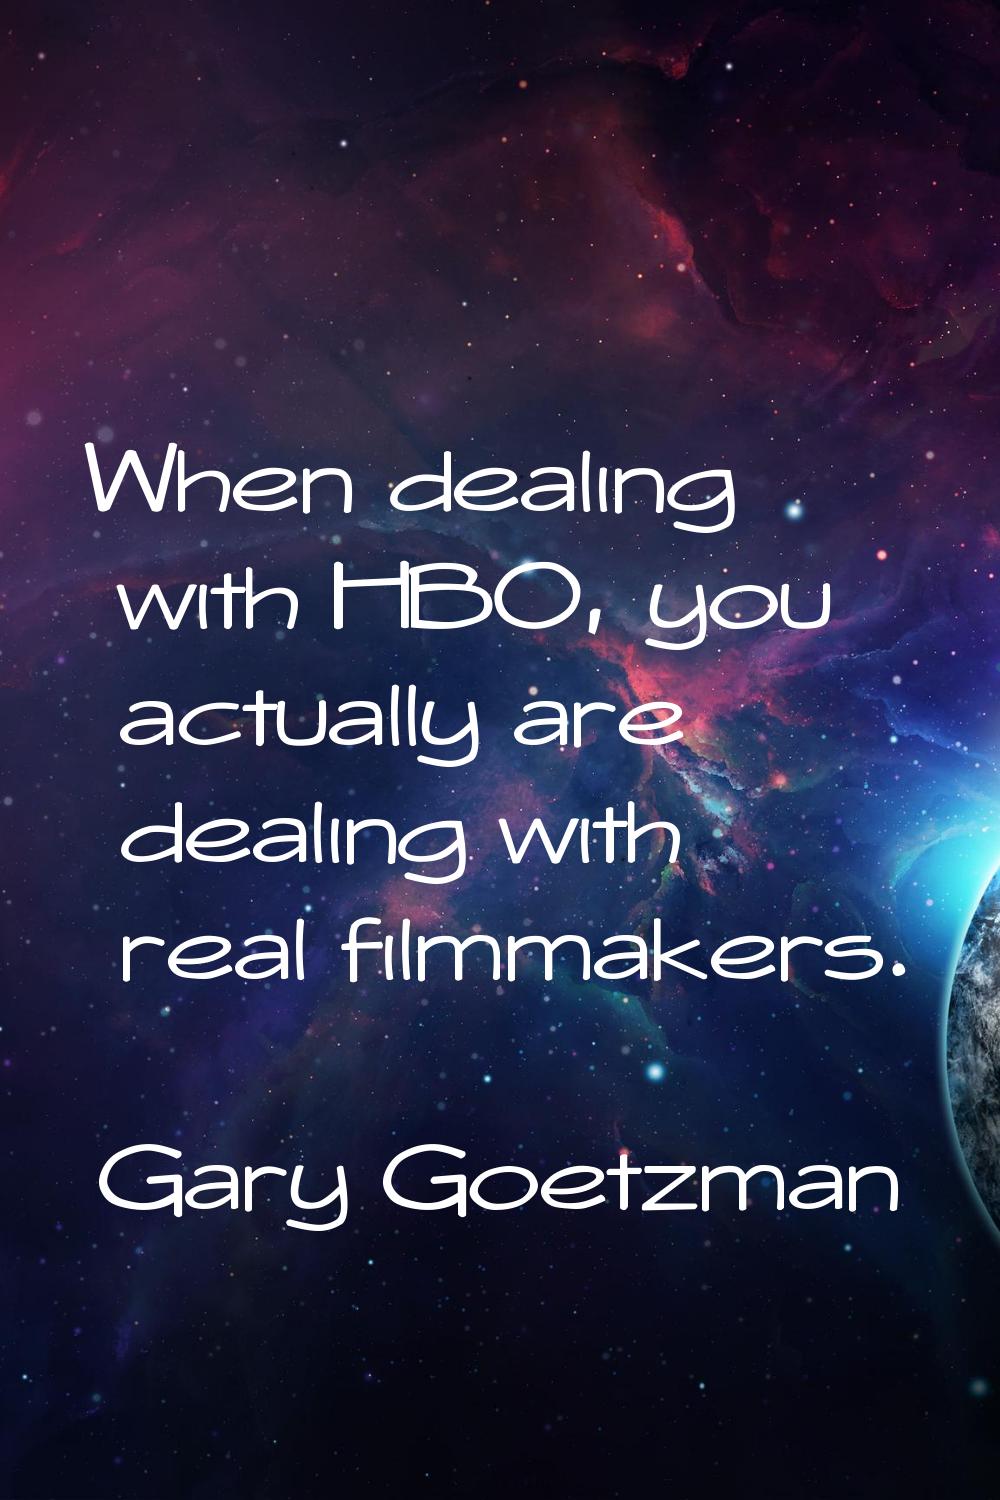 When dealing with HBO, you actually are dealing with real filmmakers.